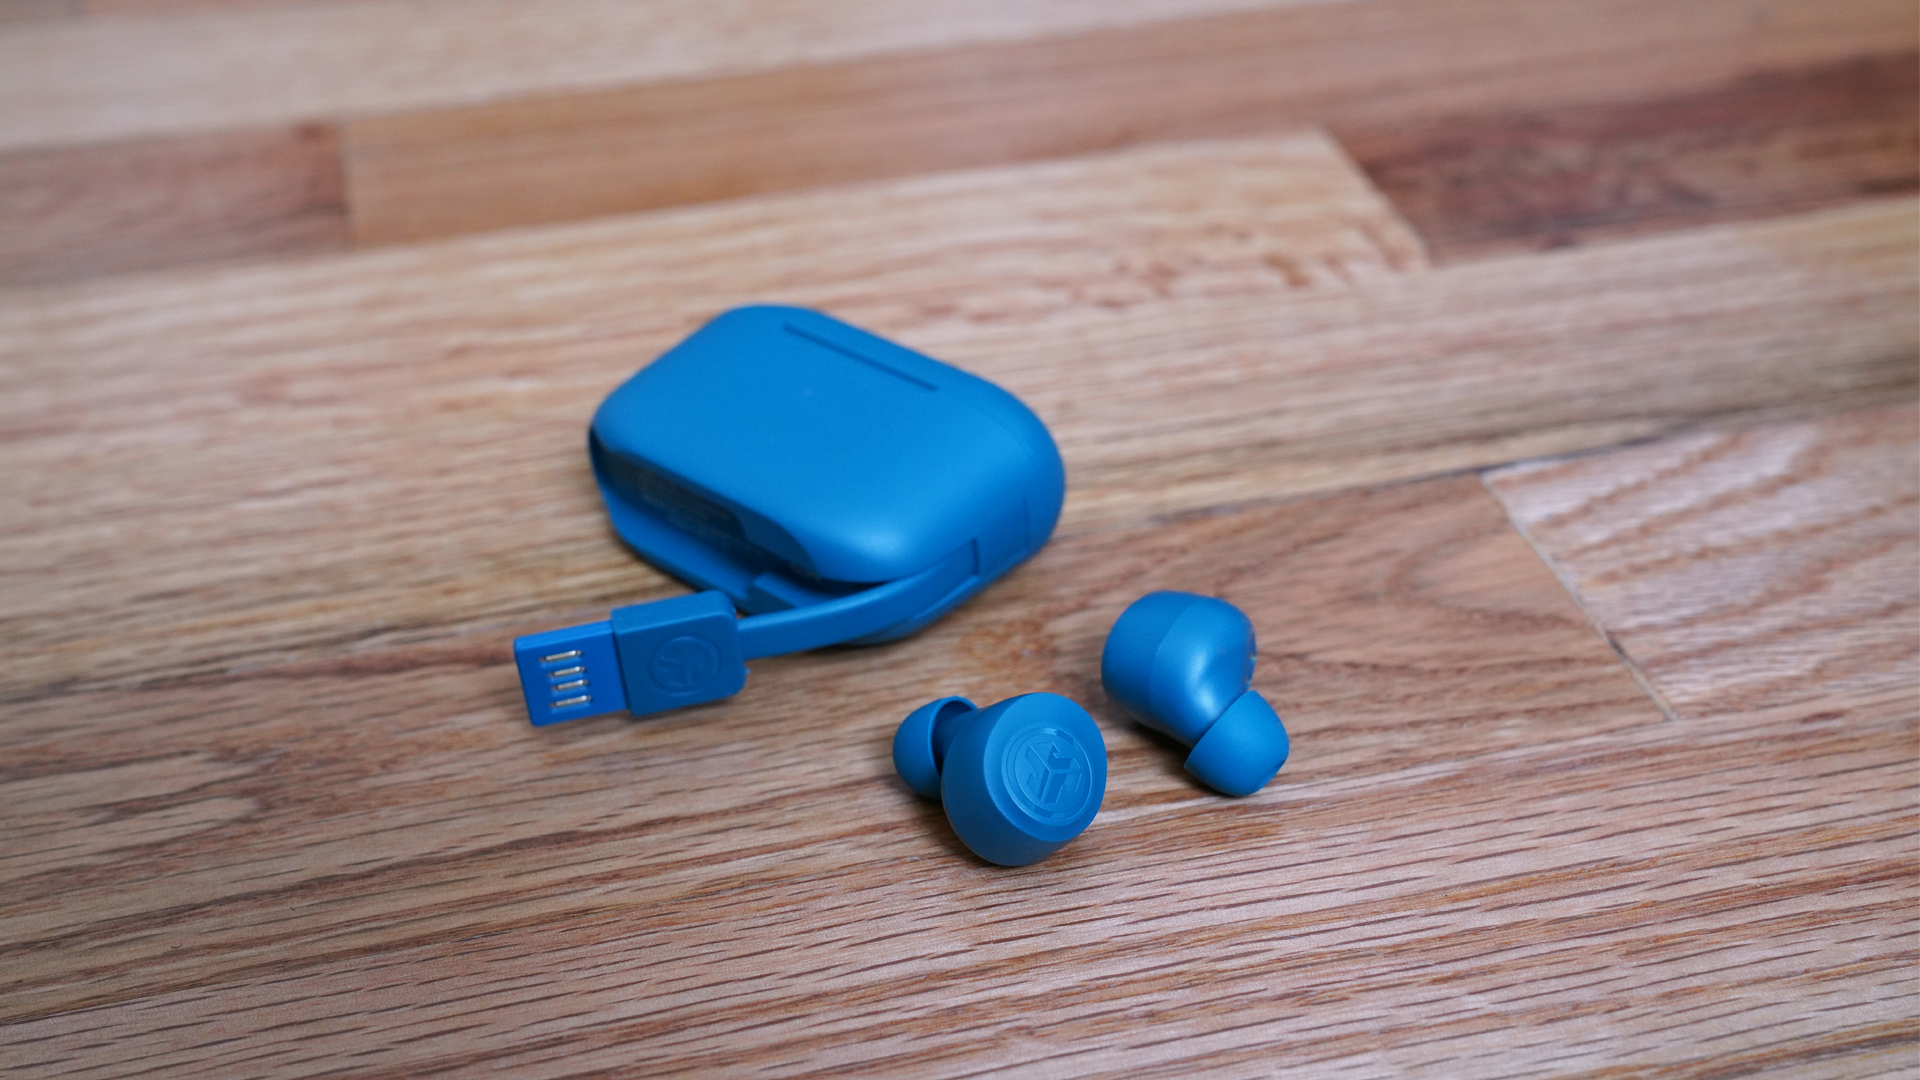 The JLAB Go Air Pro earbuds laying on a wooden floor next to their case, showing the attached USB-A charging cable